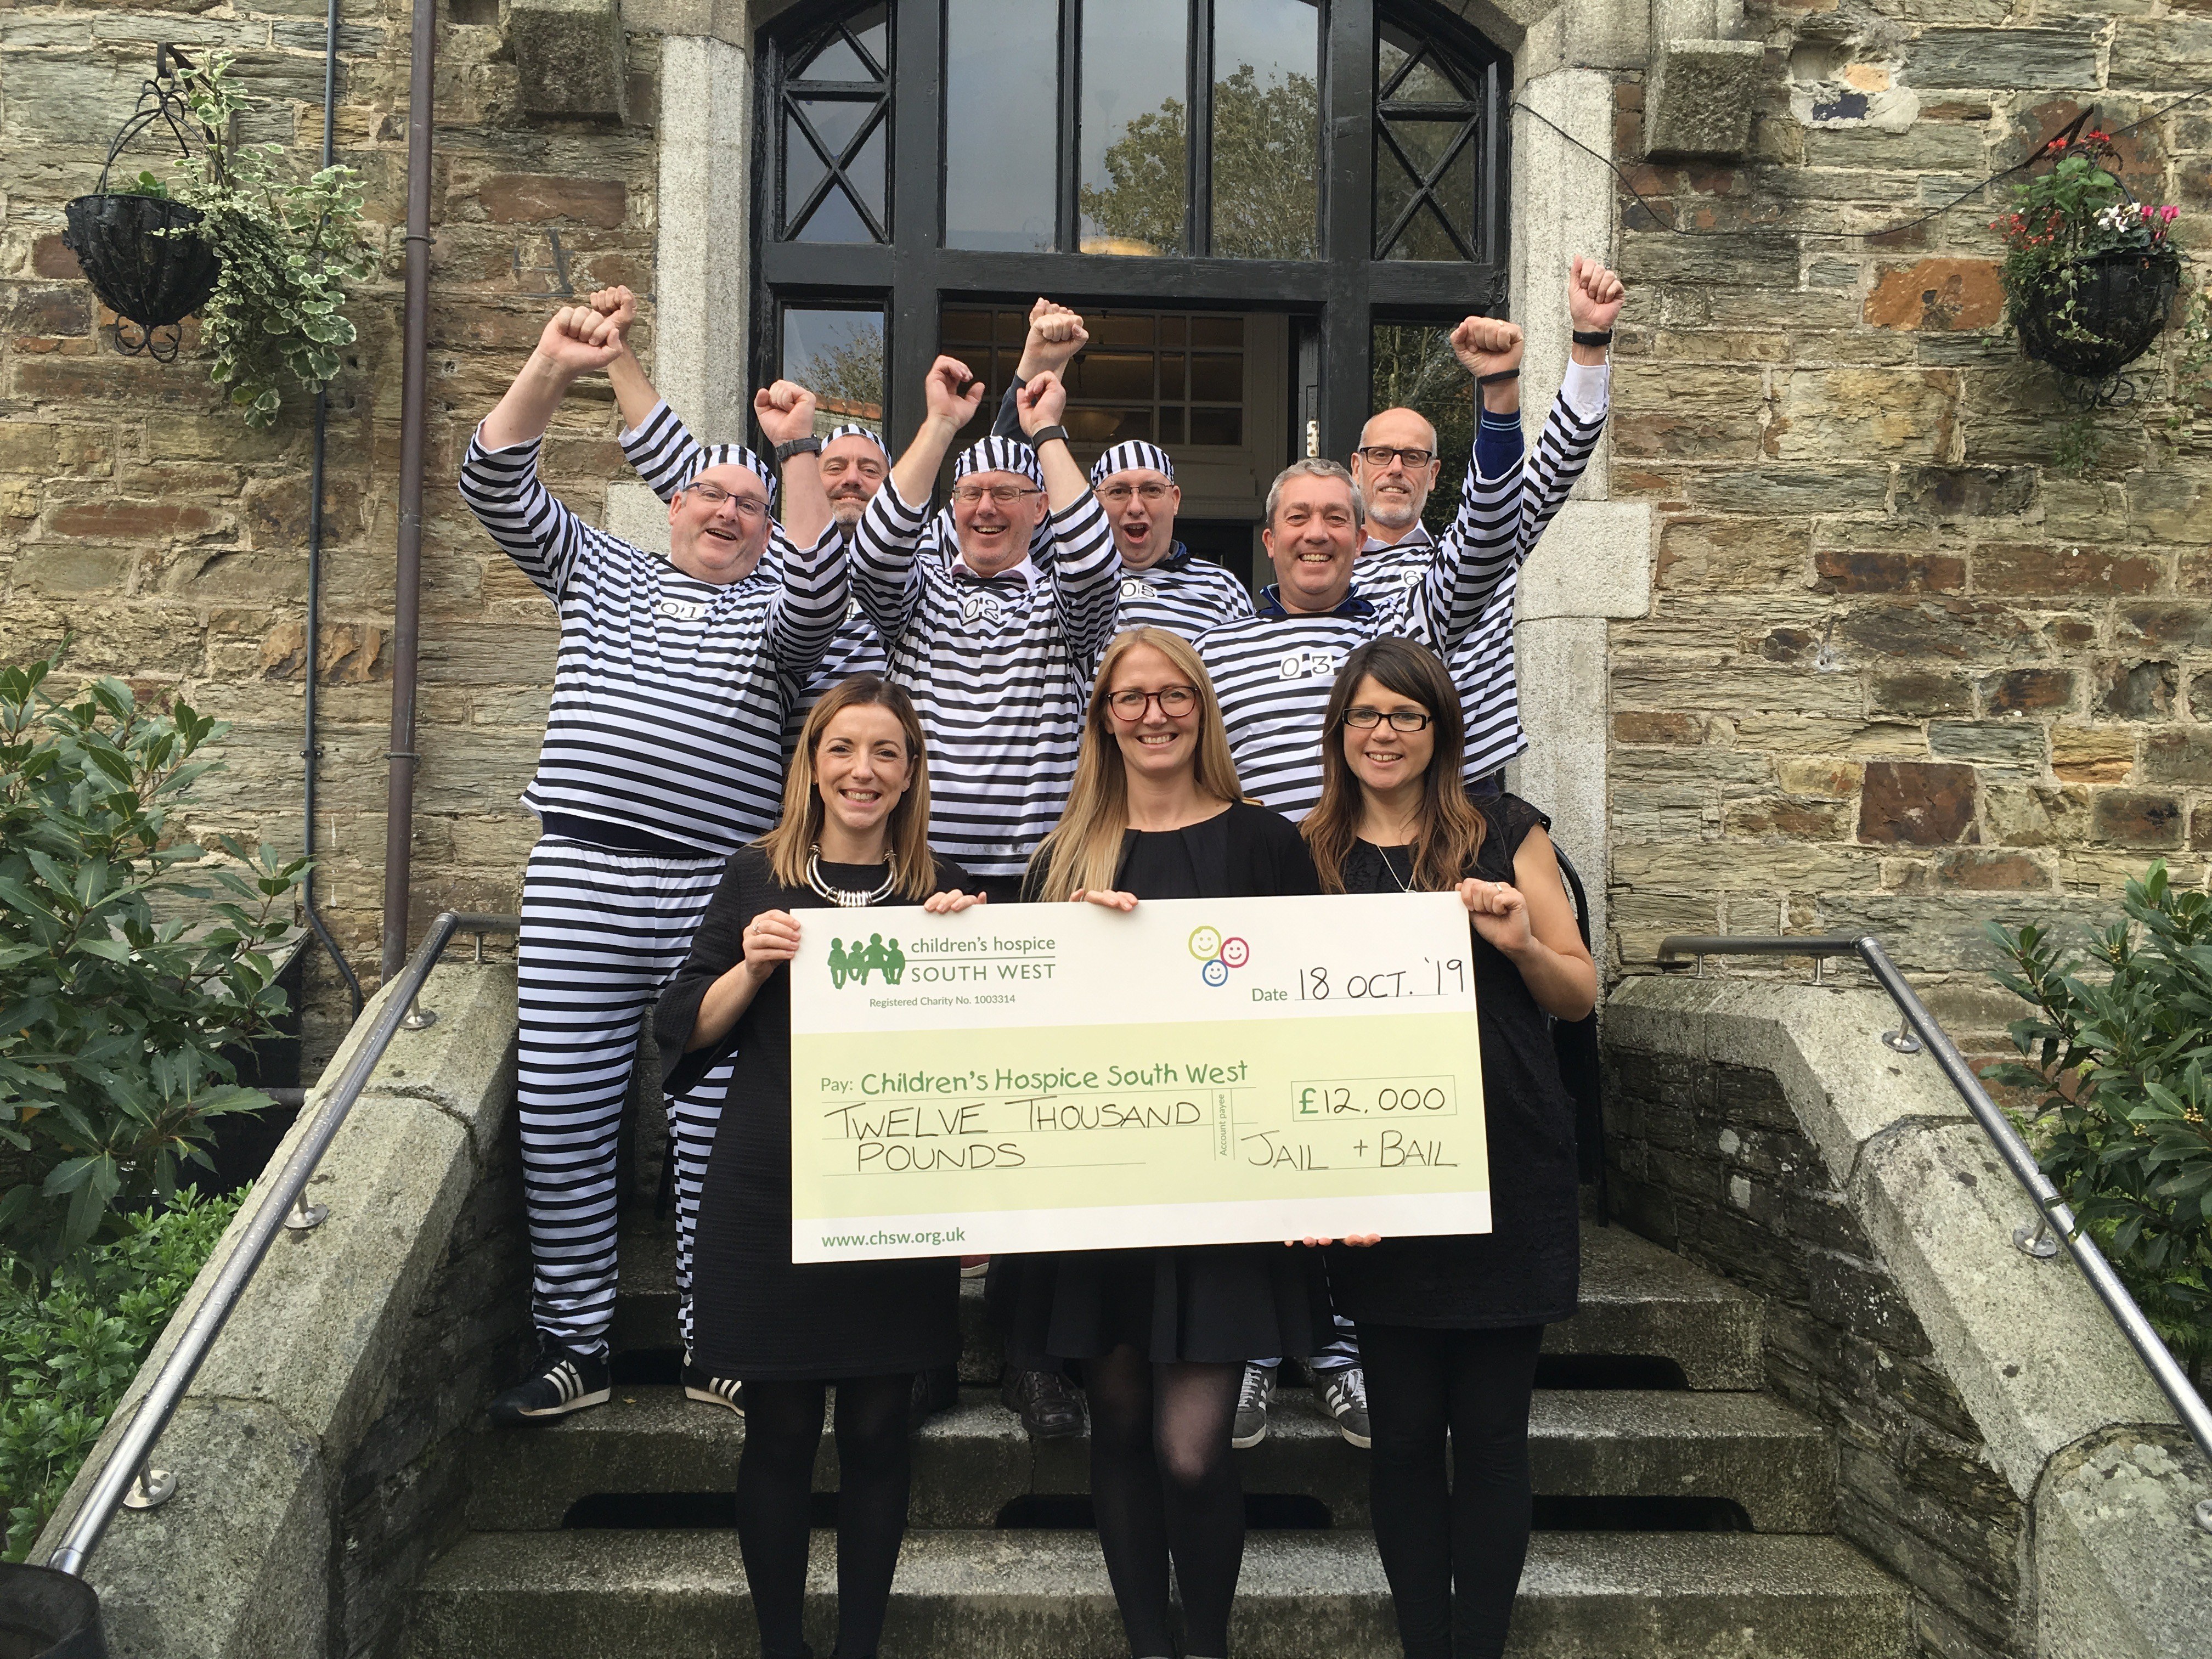 Over £12,000 raised at Jail and Bail in Bodmin